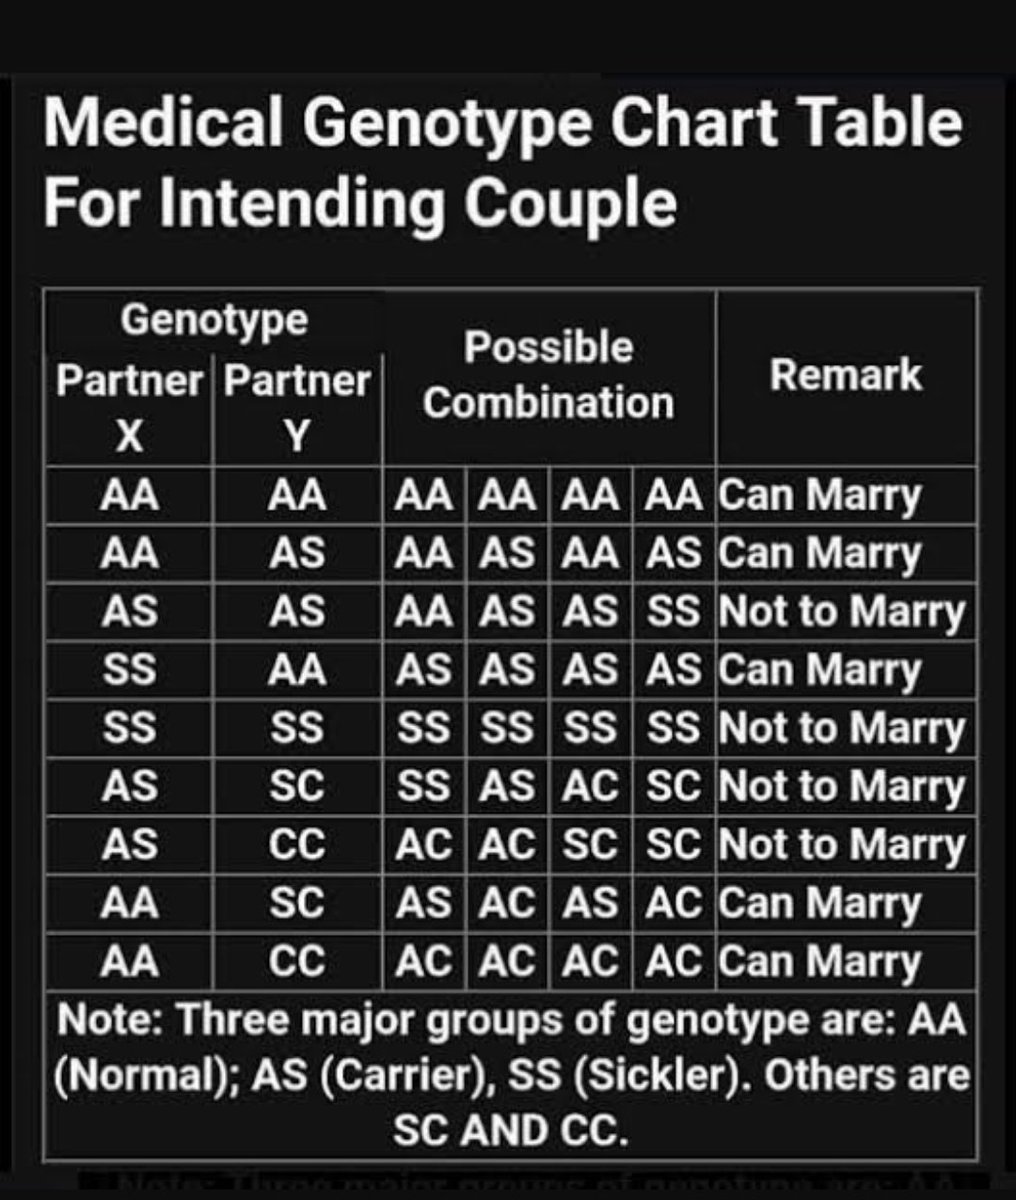 'She/him is the love of my life'
'She/him is the blood of my blood'
'She/him is the bone of my bones'
'I'll die without him/her'

Have you both checked your genotypes?
Think about the life of that innocent unborn child.
#KnowYourGenotype 
#WorldSickleCellDay